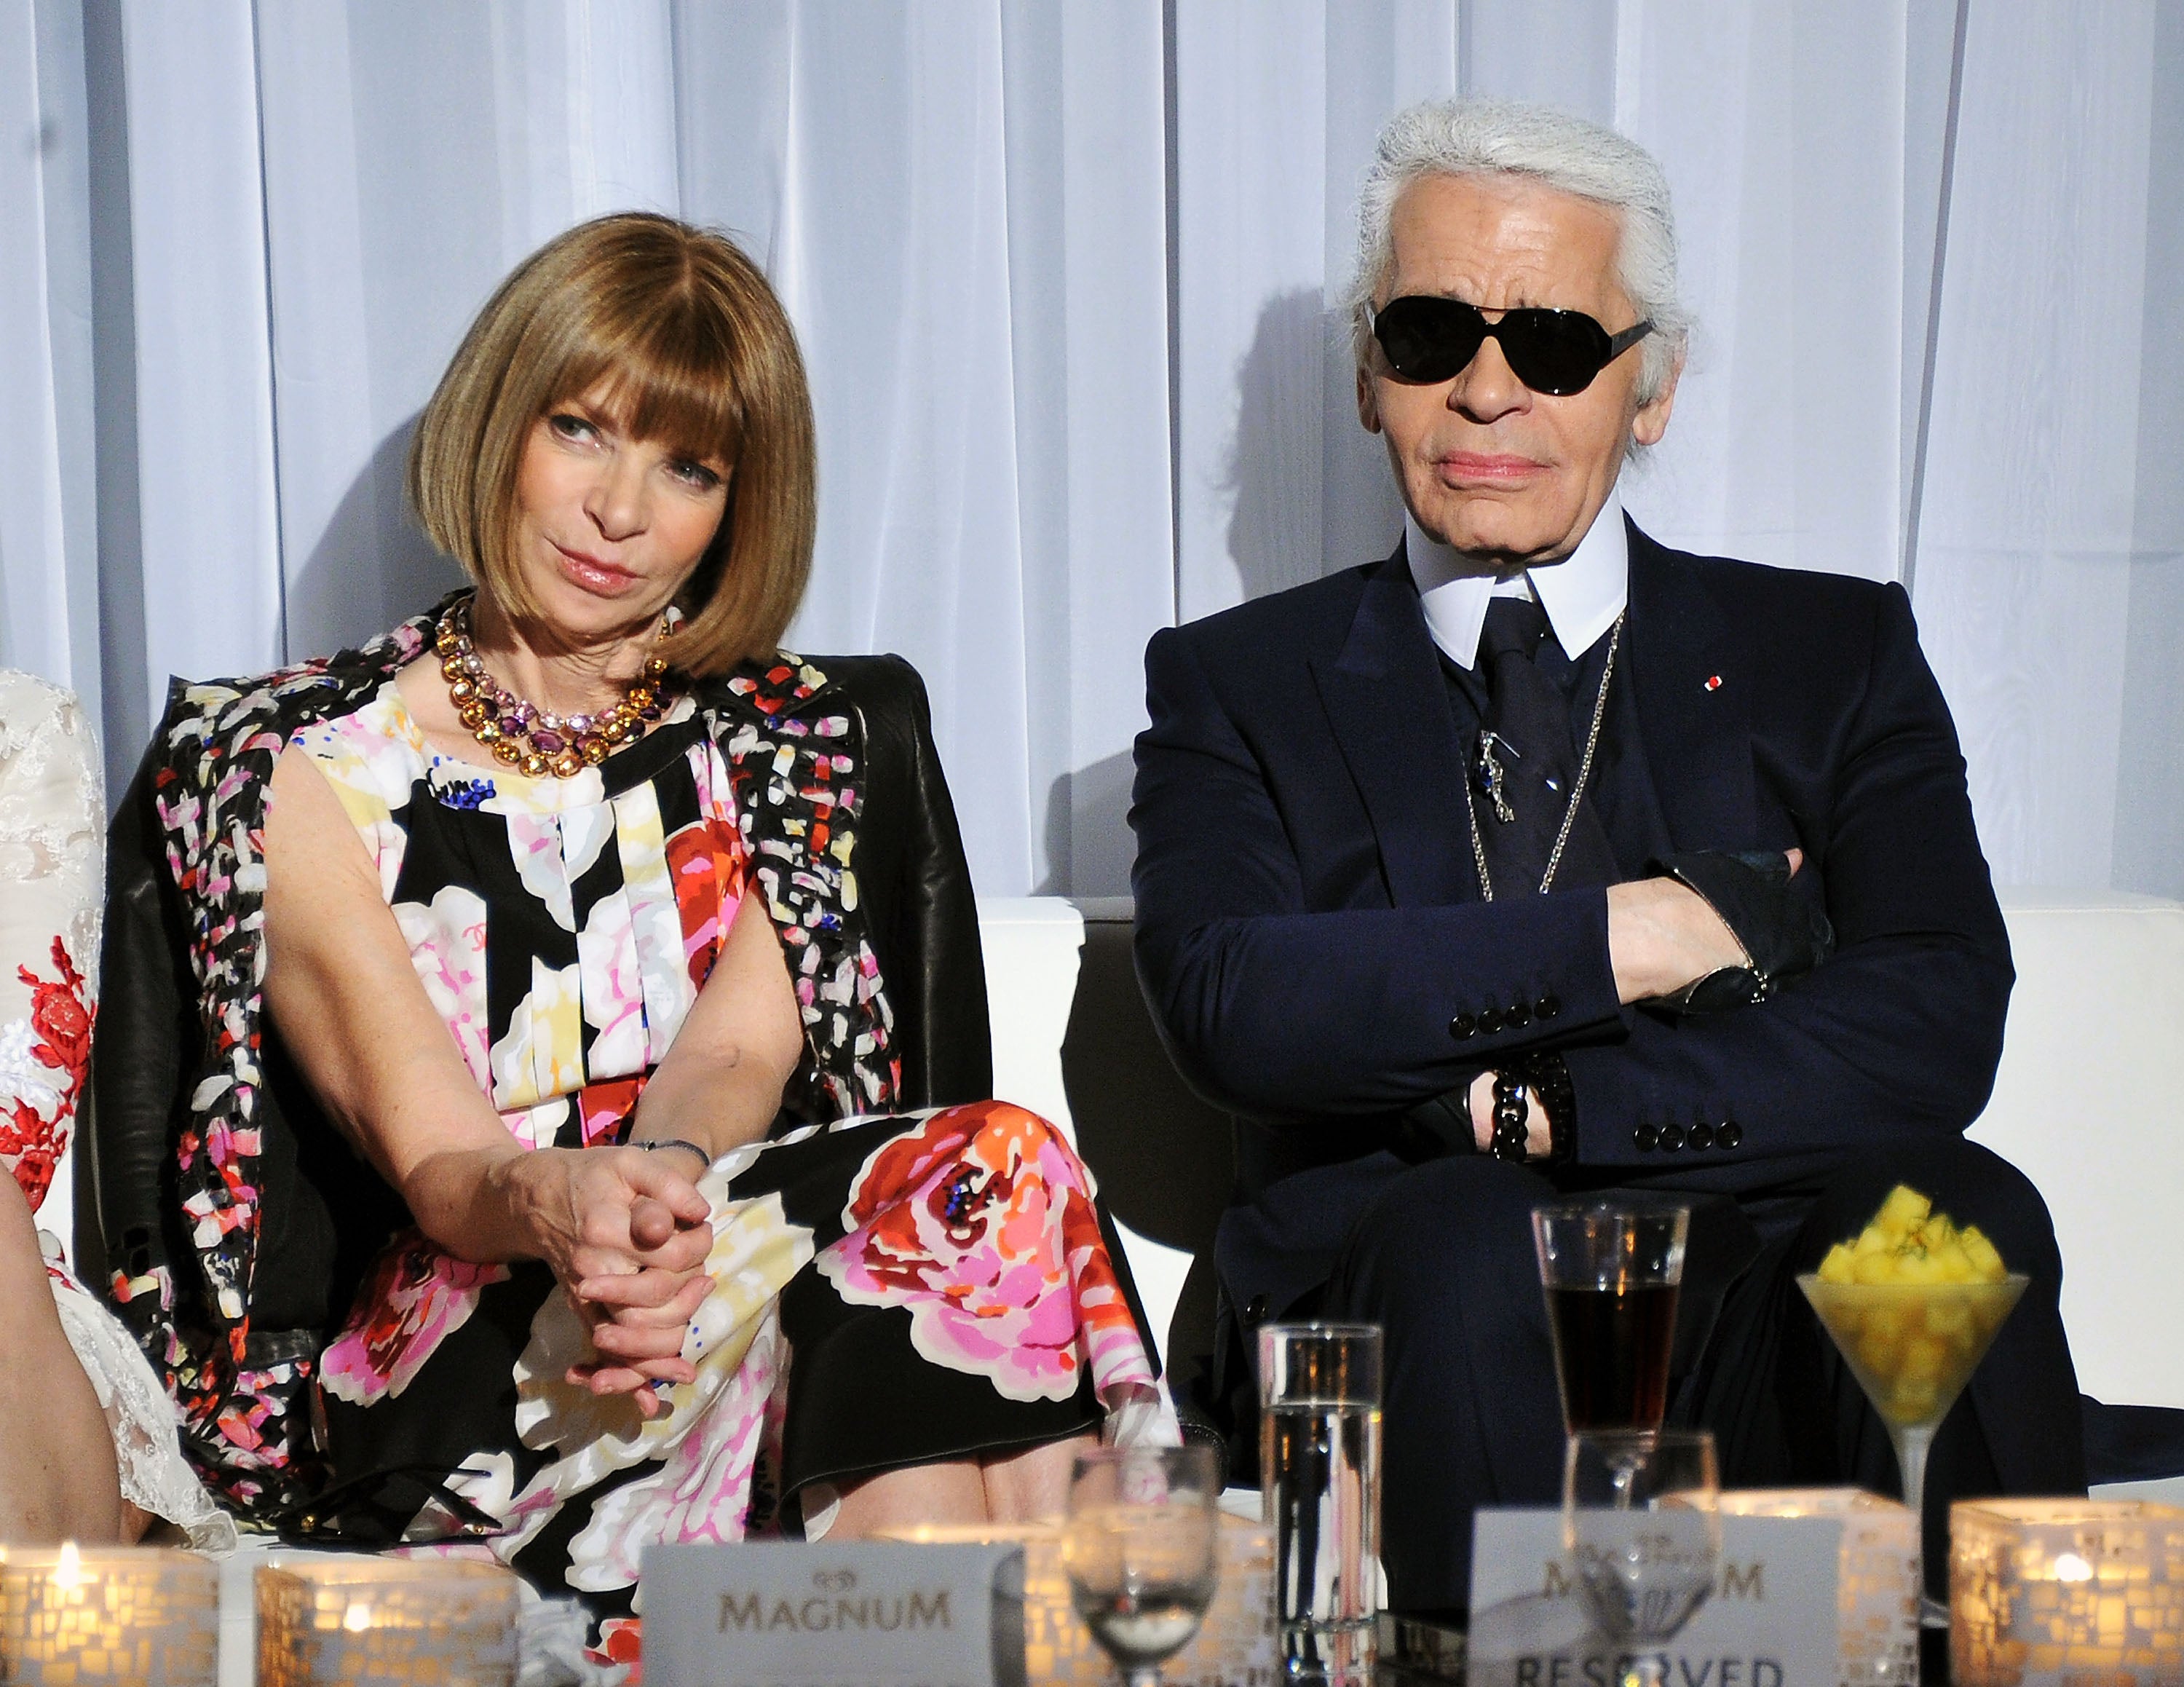 Anna Wintour and Karl Lagerfeld were close friends before his death in 2019